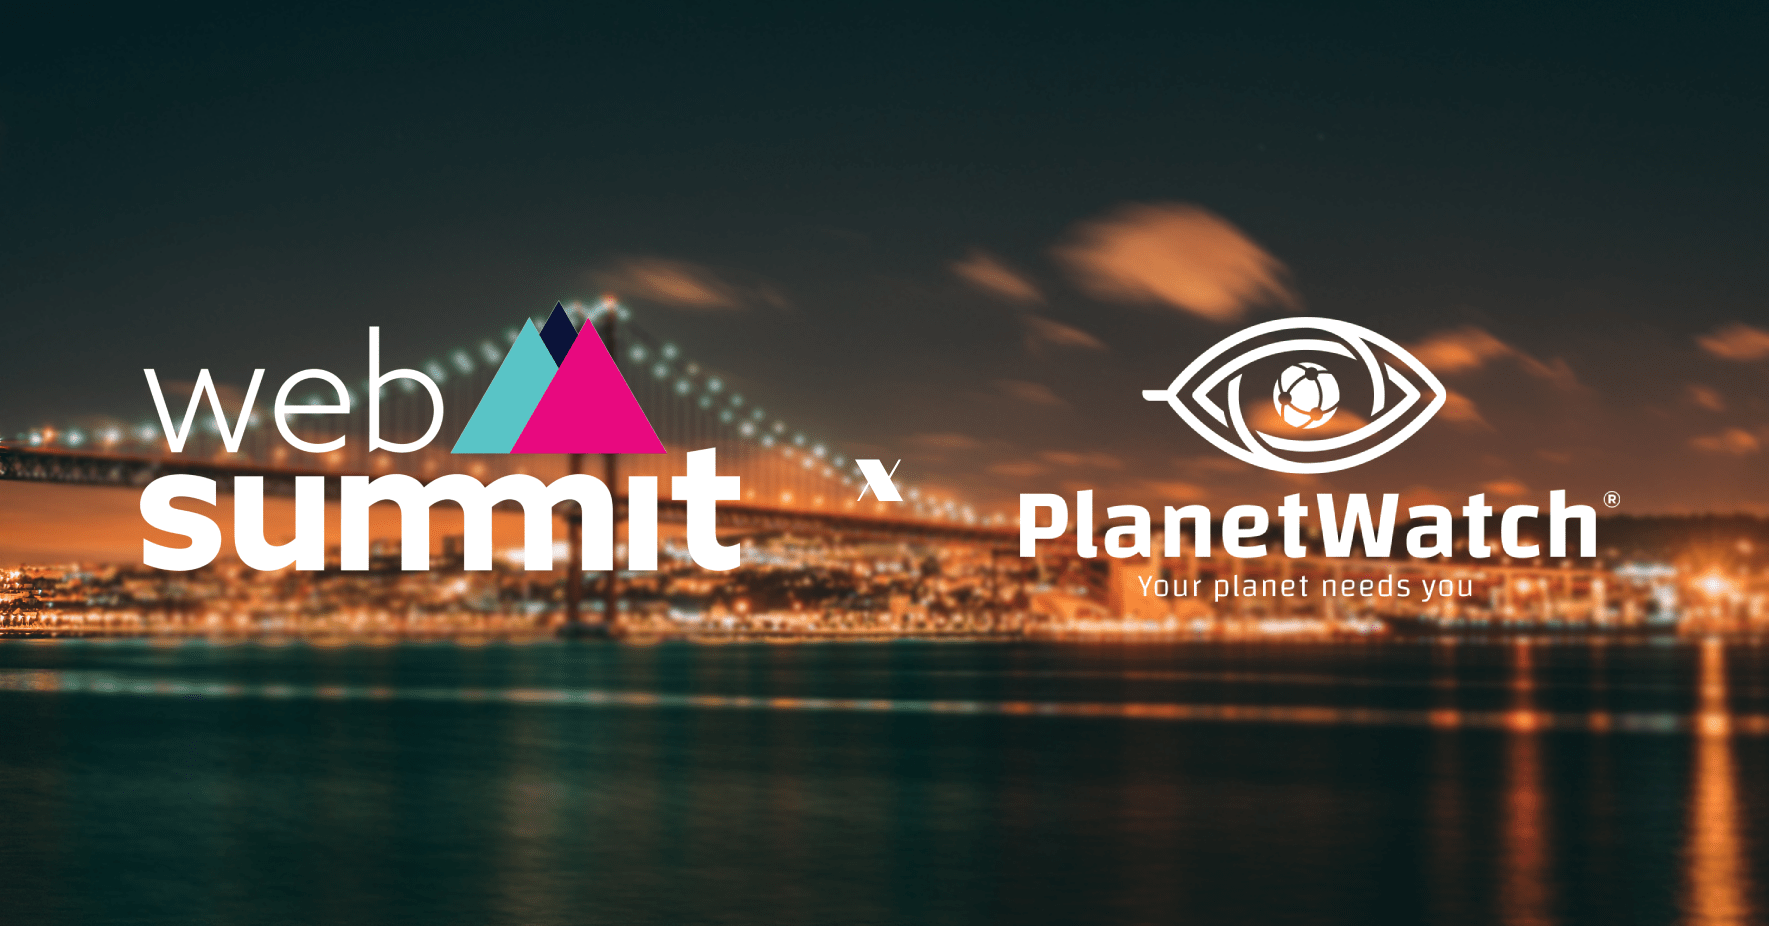 Air pollution - PlanetWatch at Web Summit